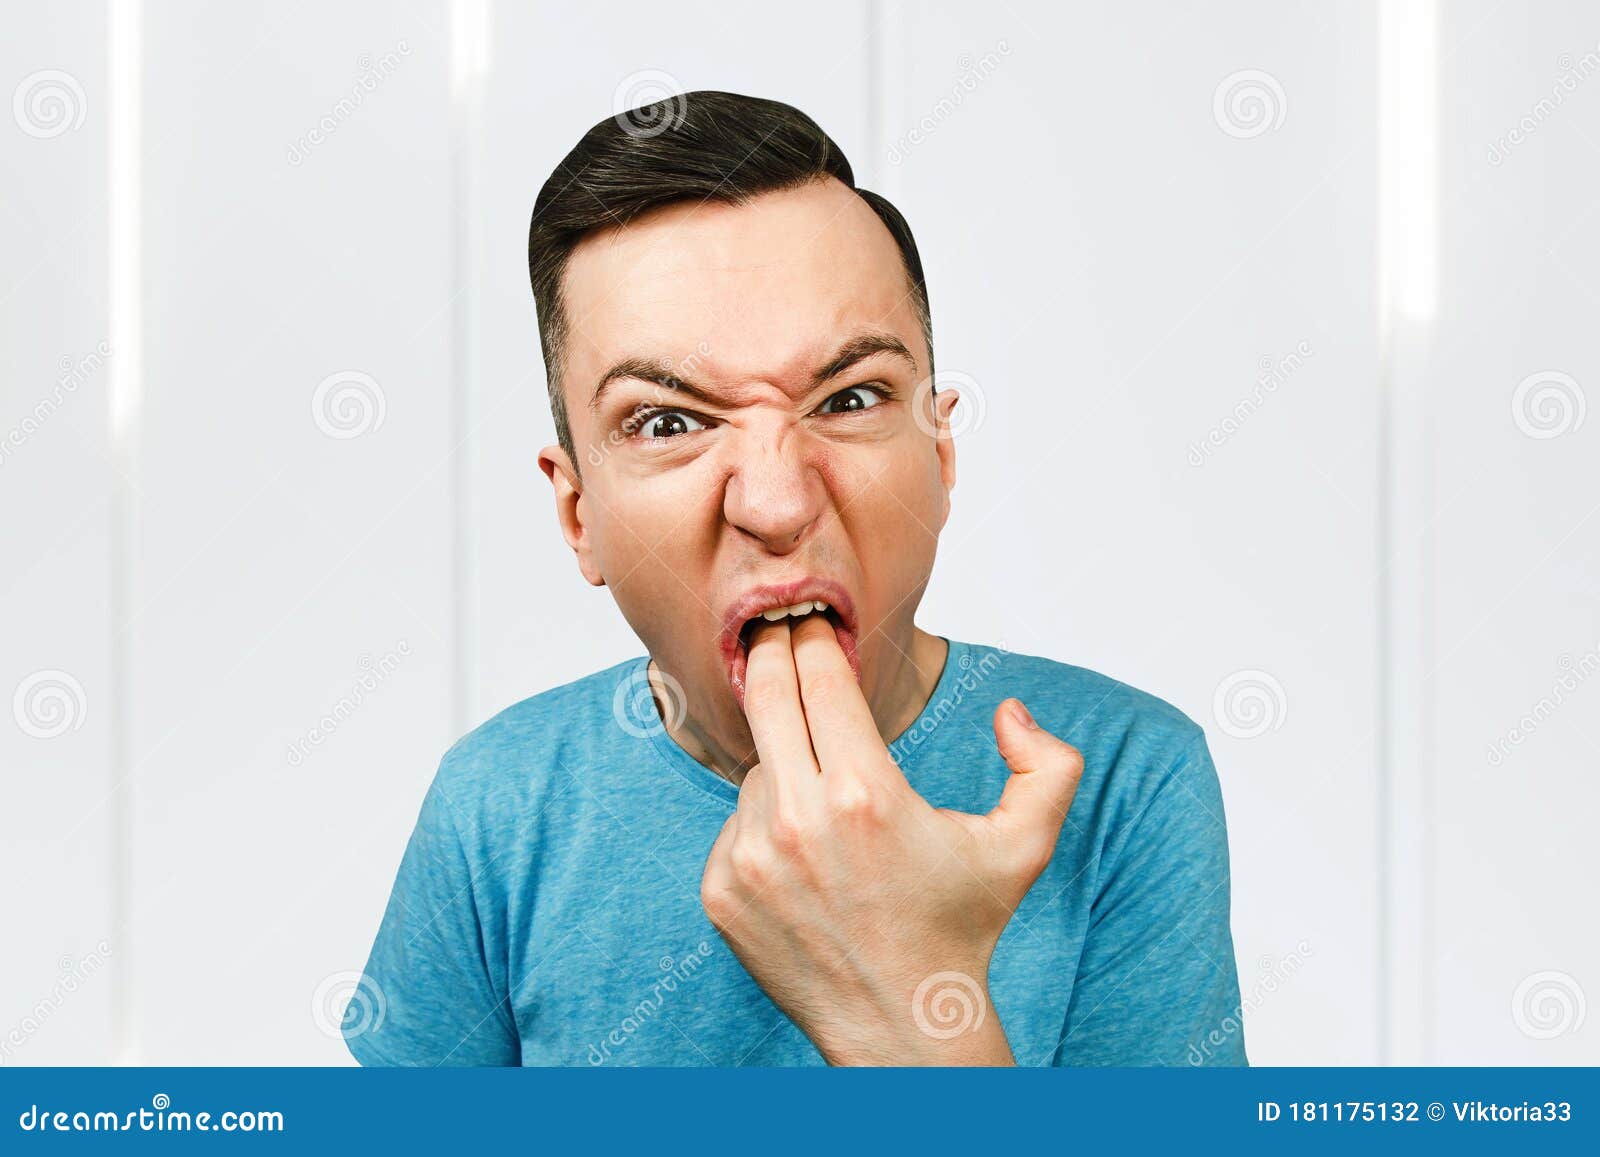 young man inserts two fingers in the mouth to induce vomiting